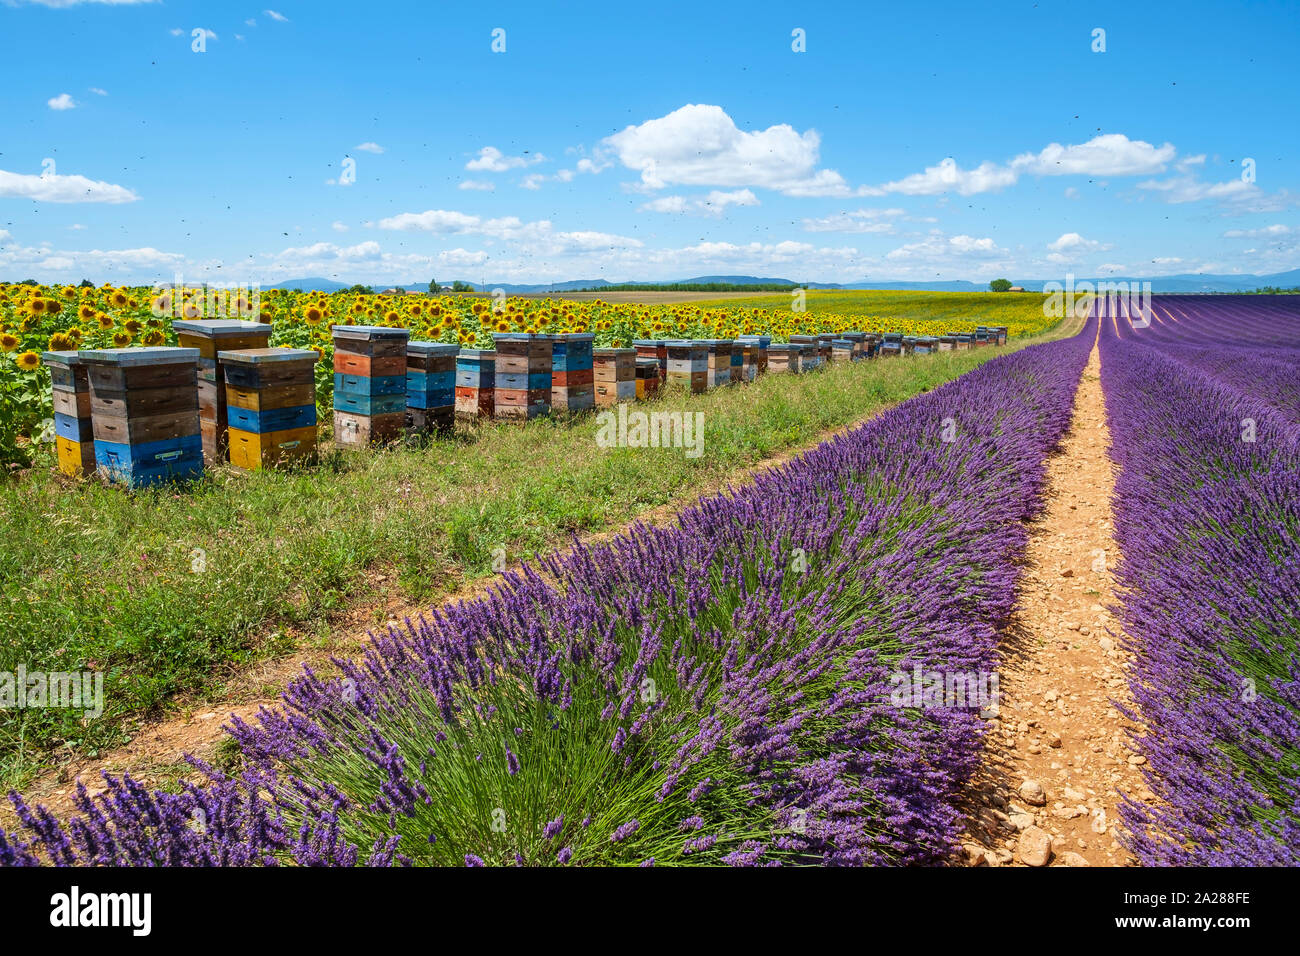 Bees swarming around beehives in lavender field on the Plateau de Valensole, Alpes-de-Haute-Provence, Provence-Alpes-Côte-d'Azur, France Stock Photo